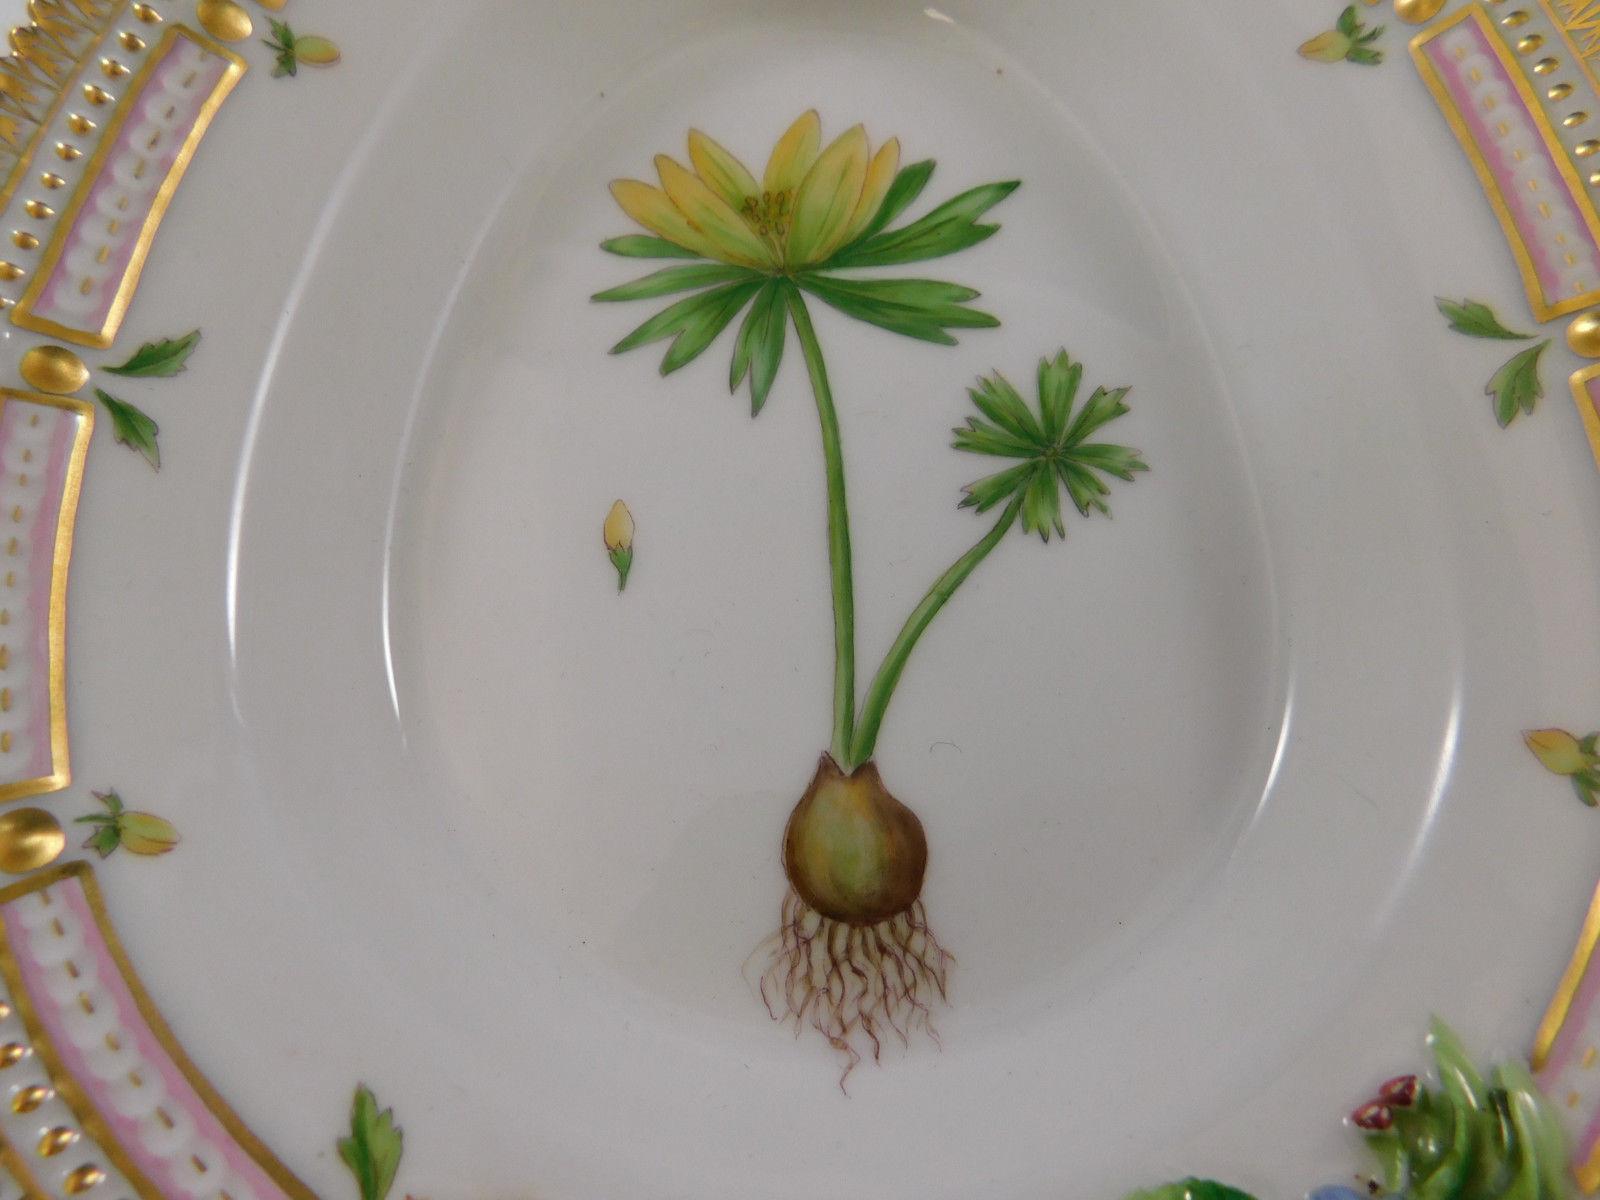 Flora Danica porcelain - Oval dish this estate porcelain oval dish or platter is beautiful and features a large yellow flower (Helleborus hyemalis L.), branch handle, and applied three-dimensional flowers. It is in excellent condition, with no